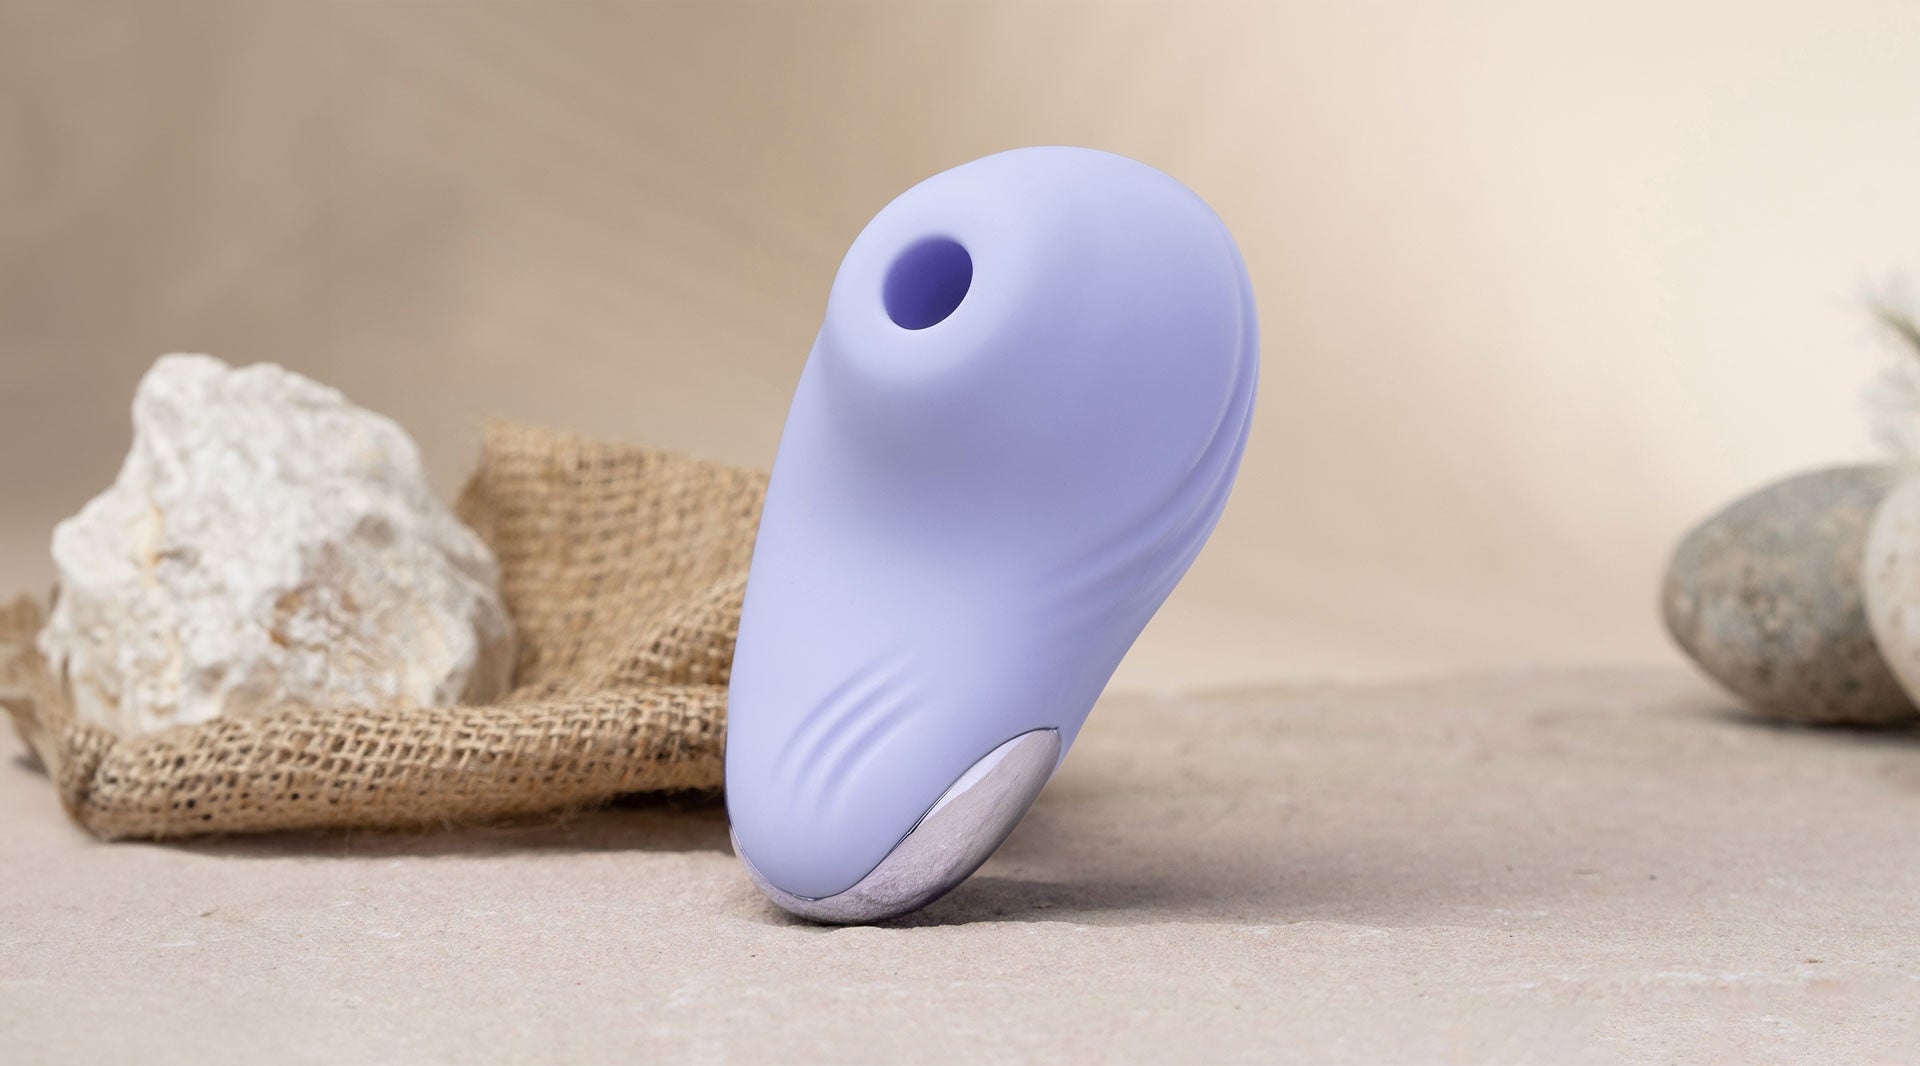 Silicone clit suction vibrating toy in baby blue.